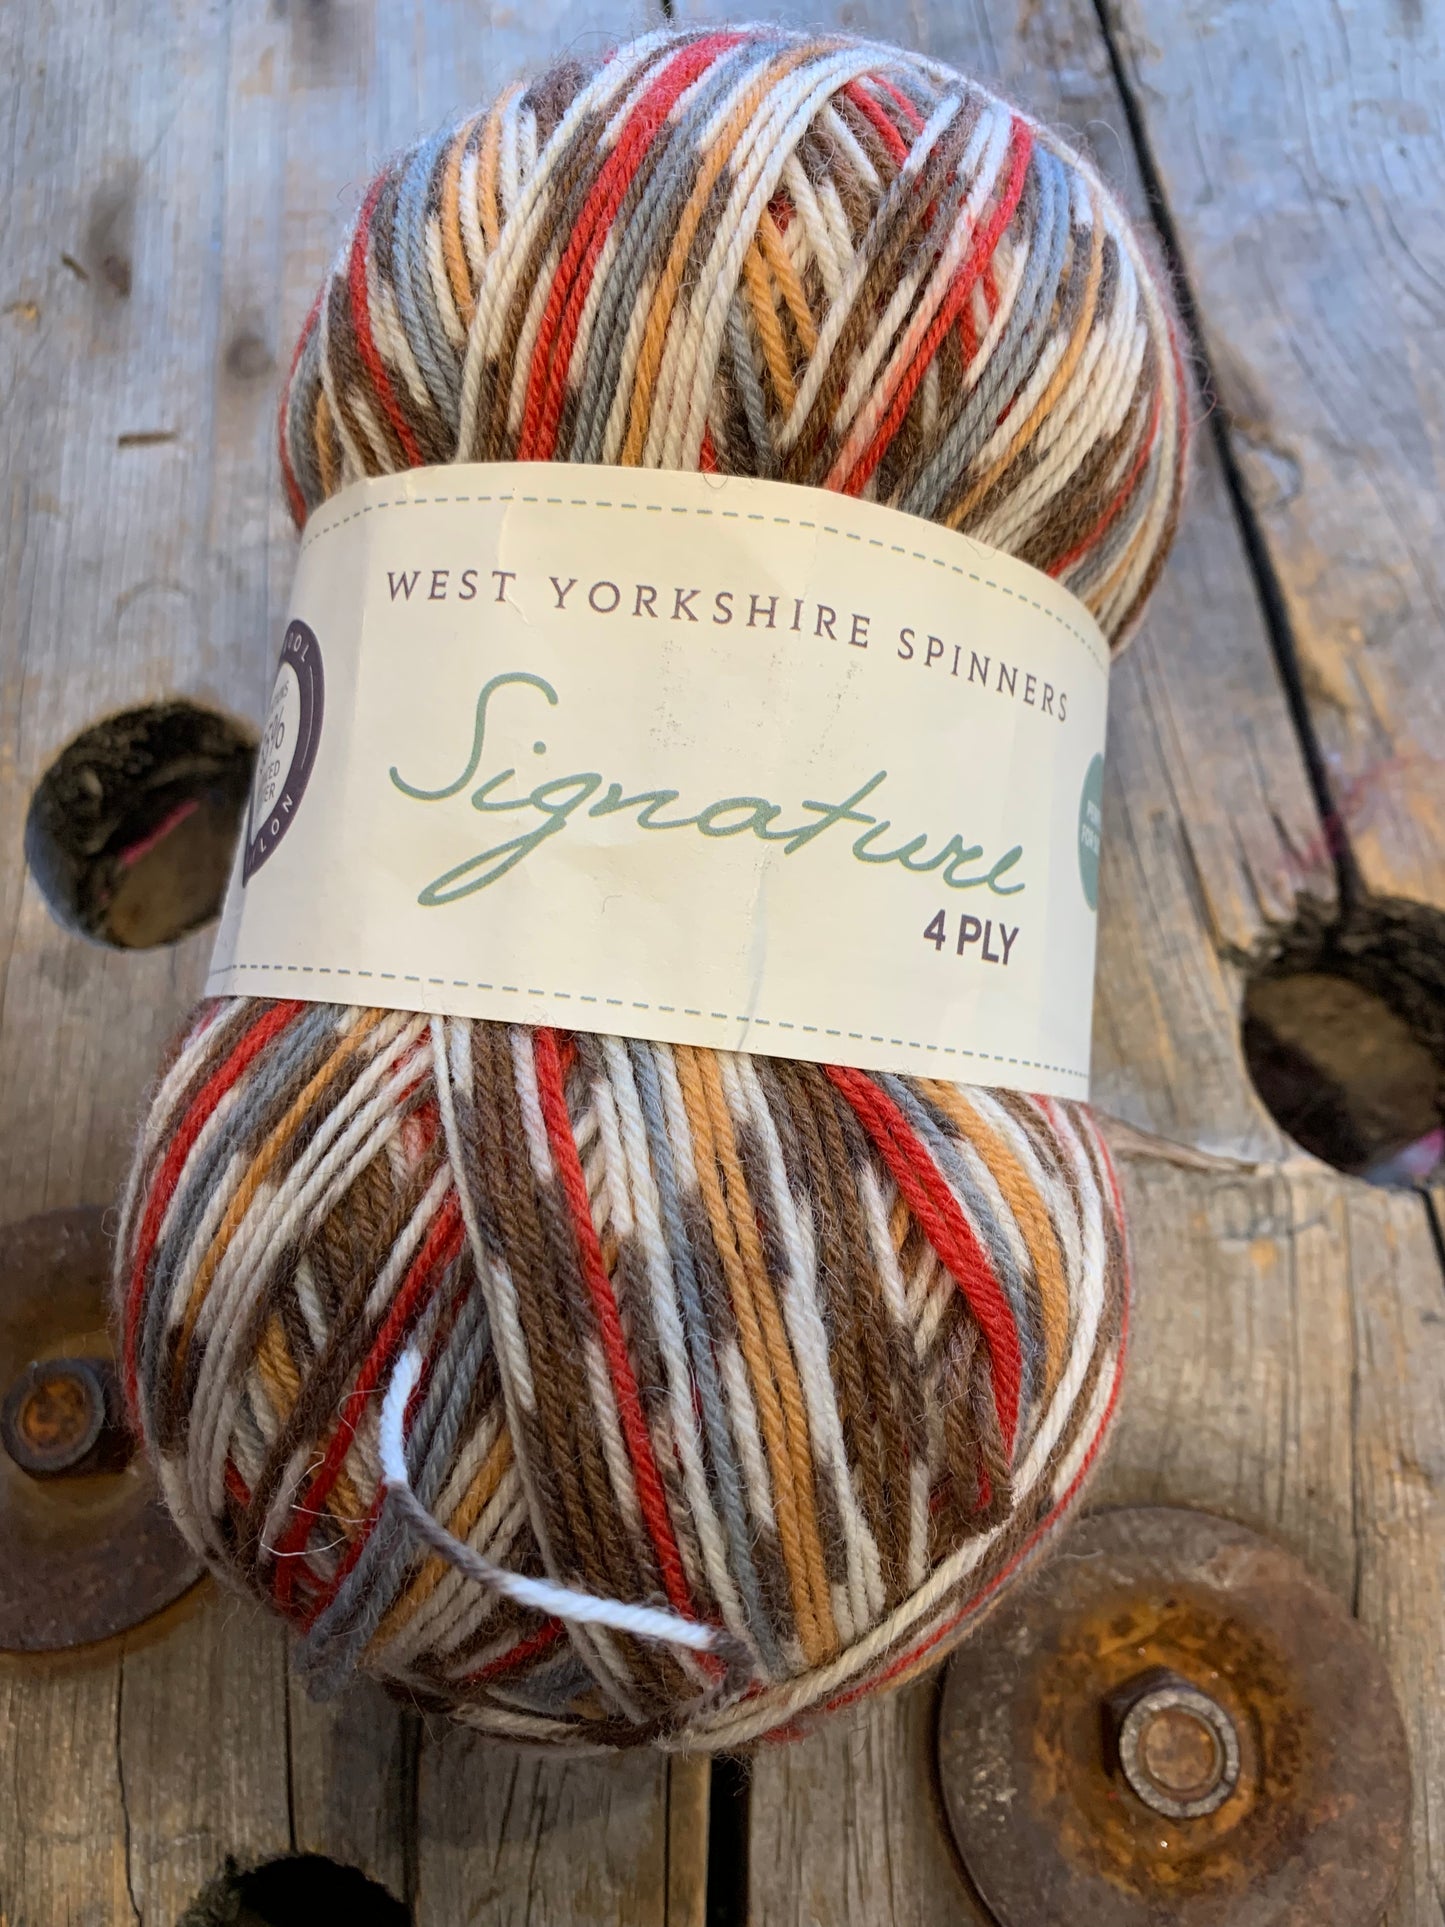 West Yorkshire Spinners - Signature 4ply